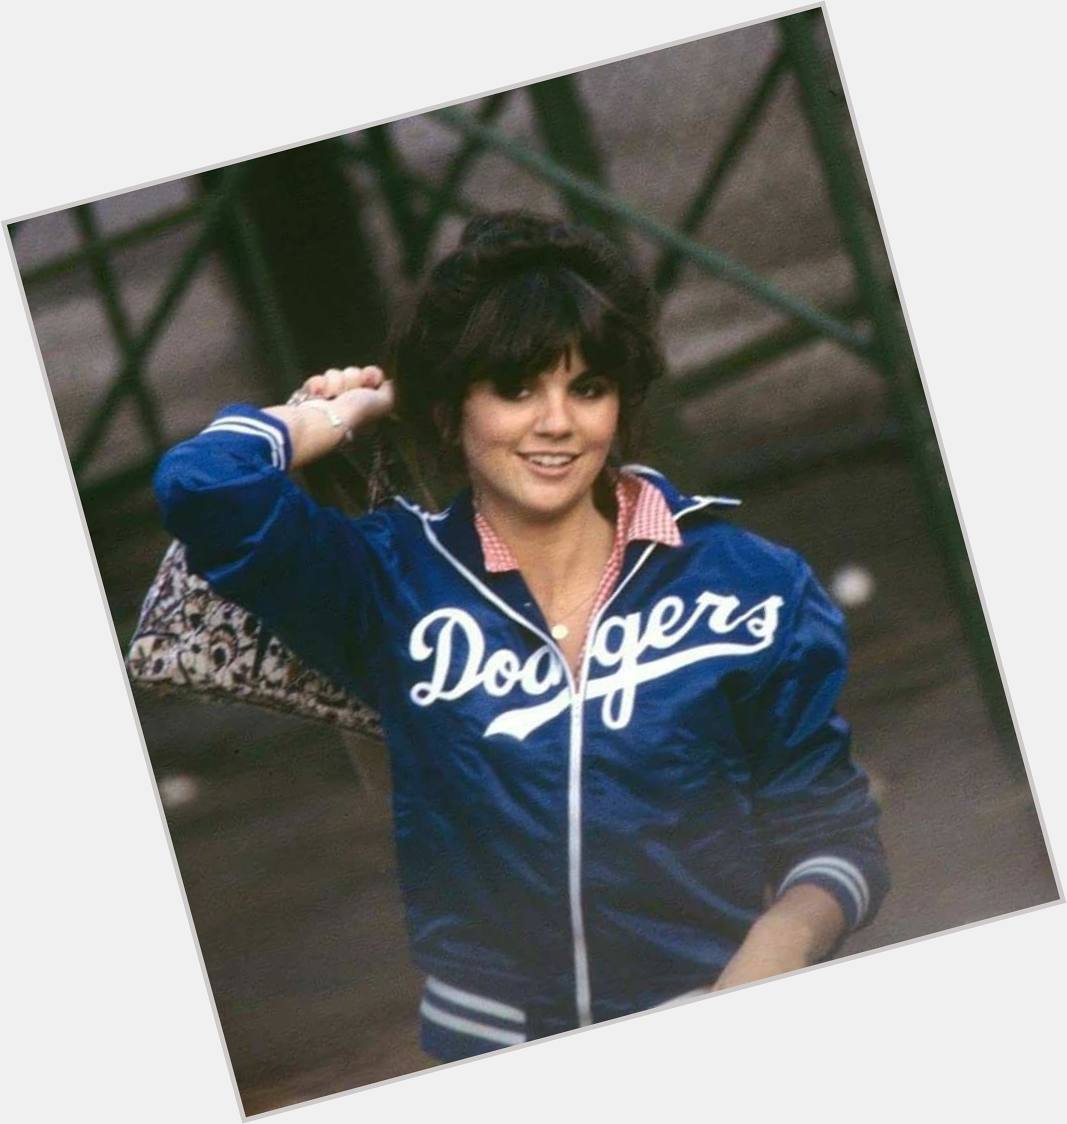 Happy Birthday to Linda Ronstadt, whose music inspired the Linda Ronstadt fastball.  

Blew By You 